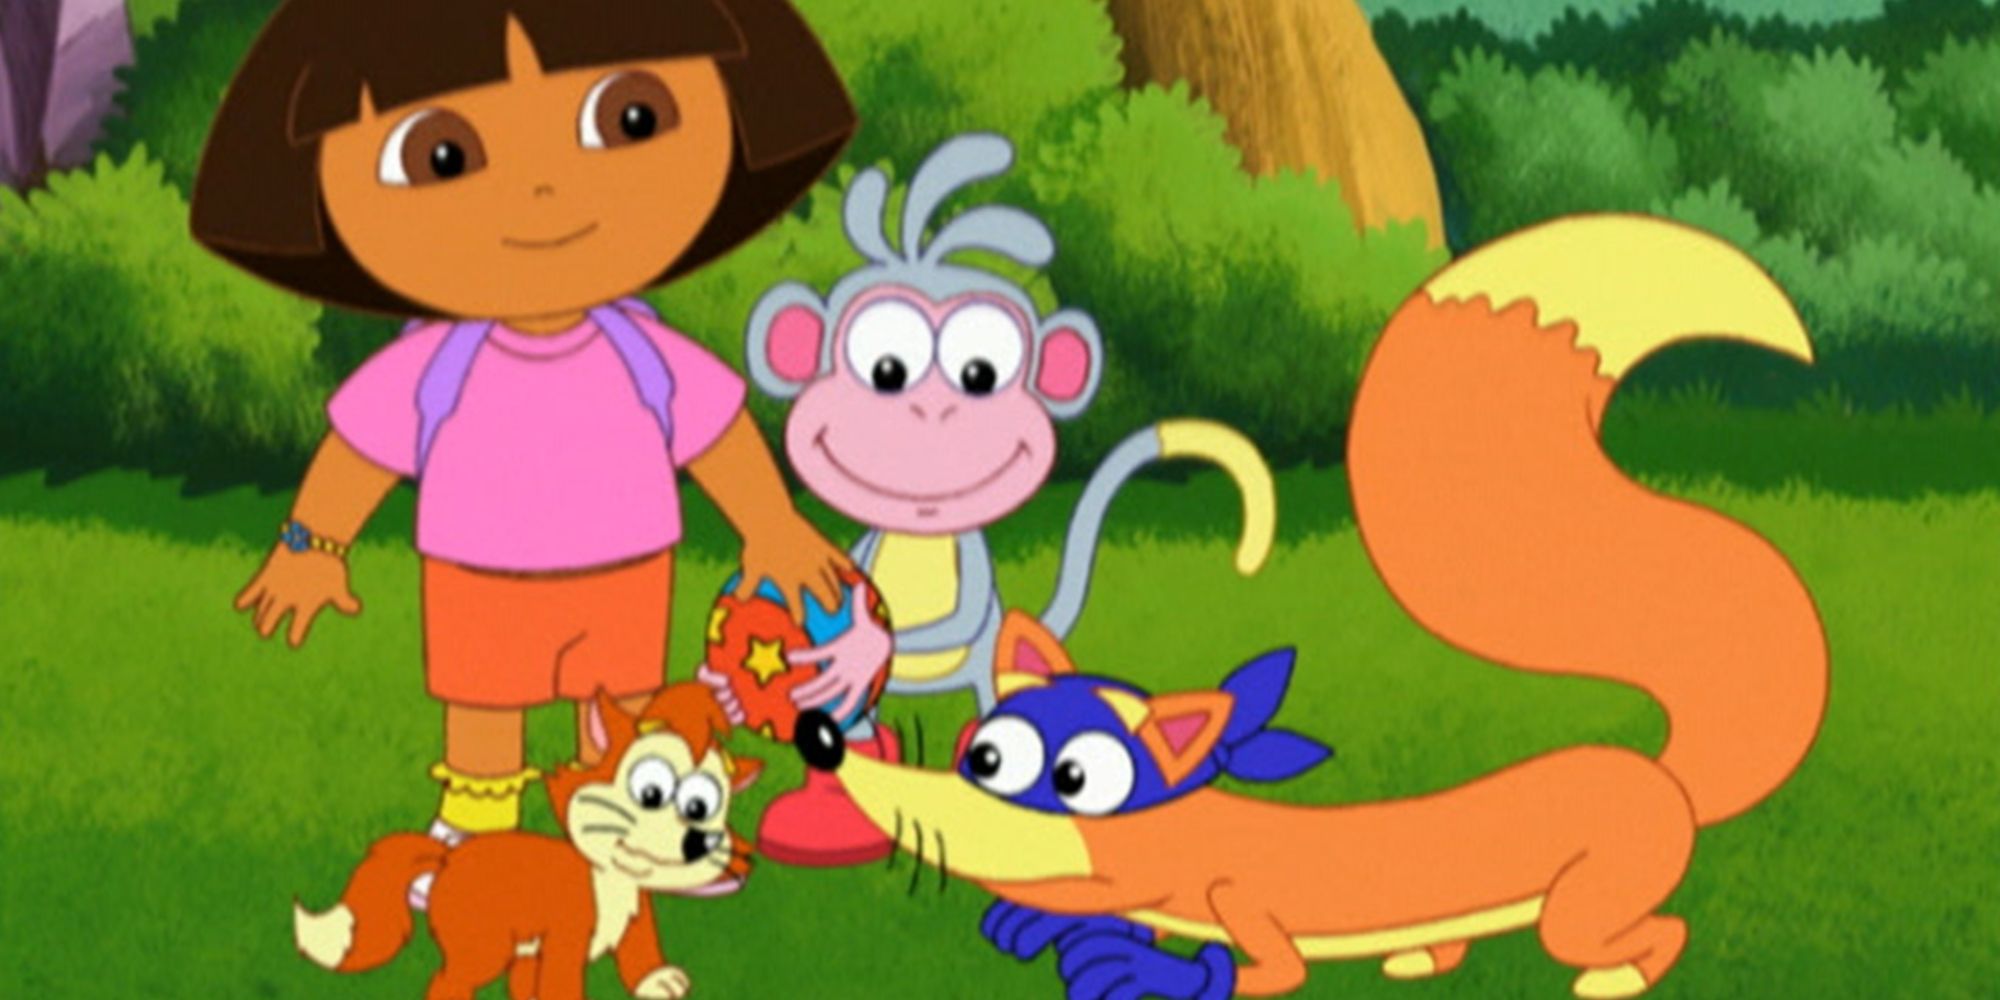 Swiper from Dora the Explorer interacting with a baby fox while Dora and Boots the Monkey look at him